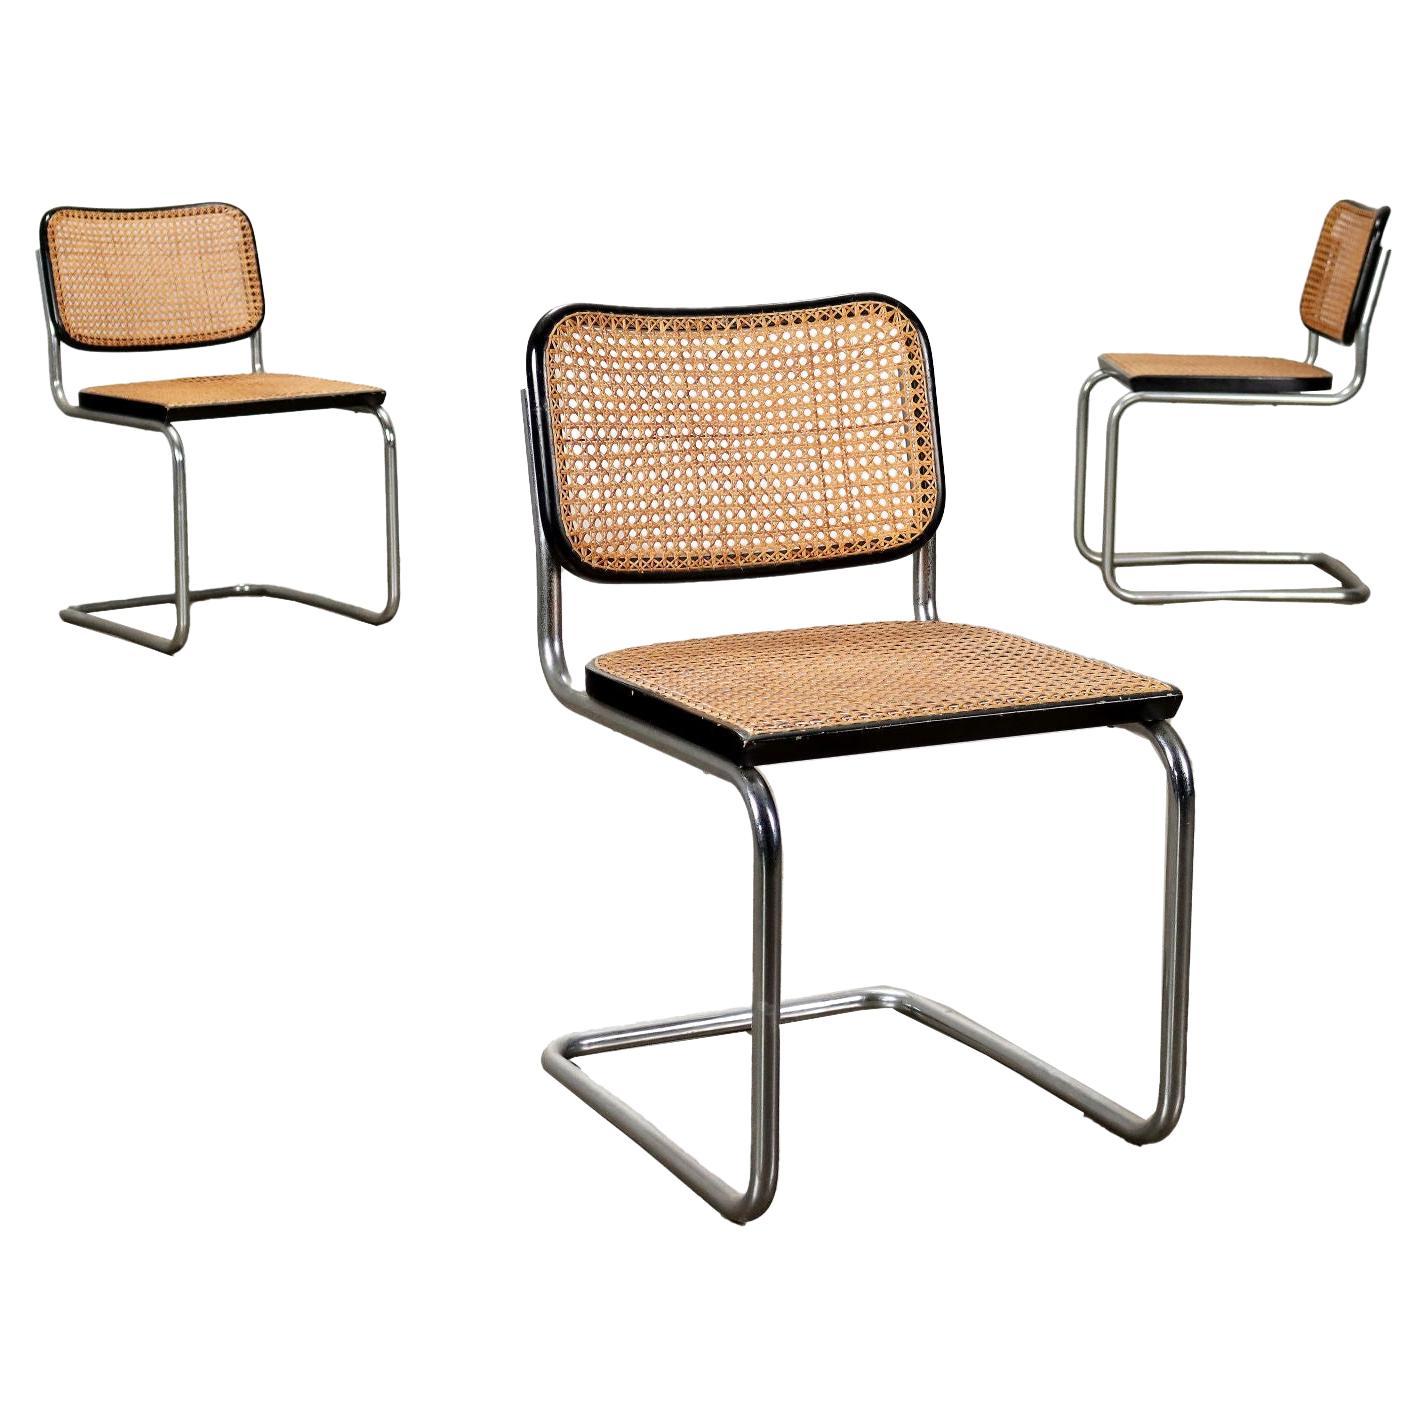 Group of 3 Chairs Gavina Cesca Wood, Italy, 1960s For Sale